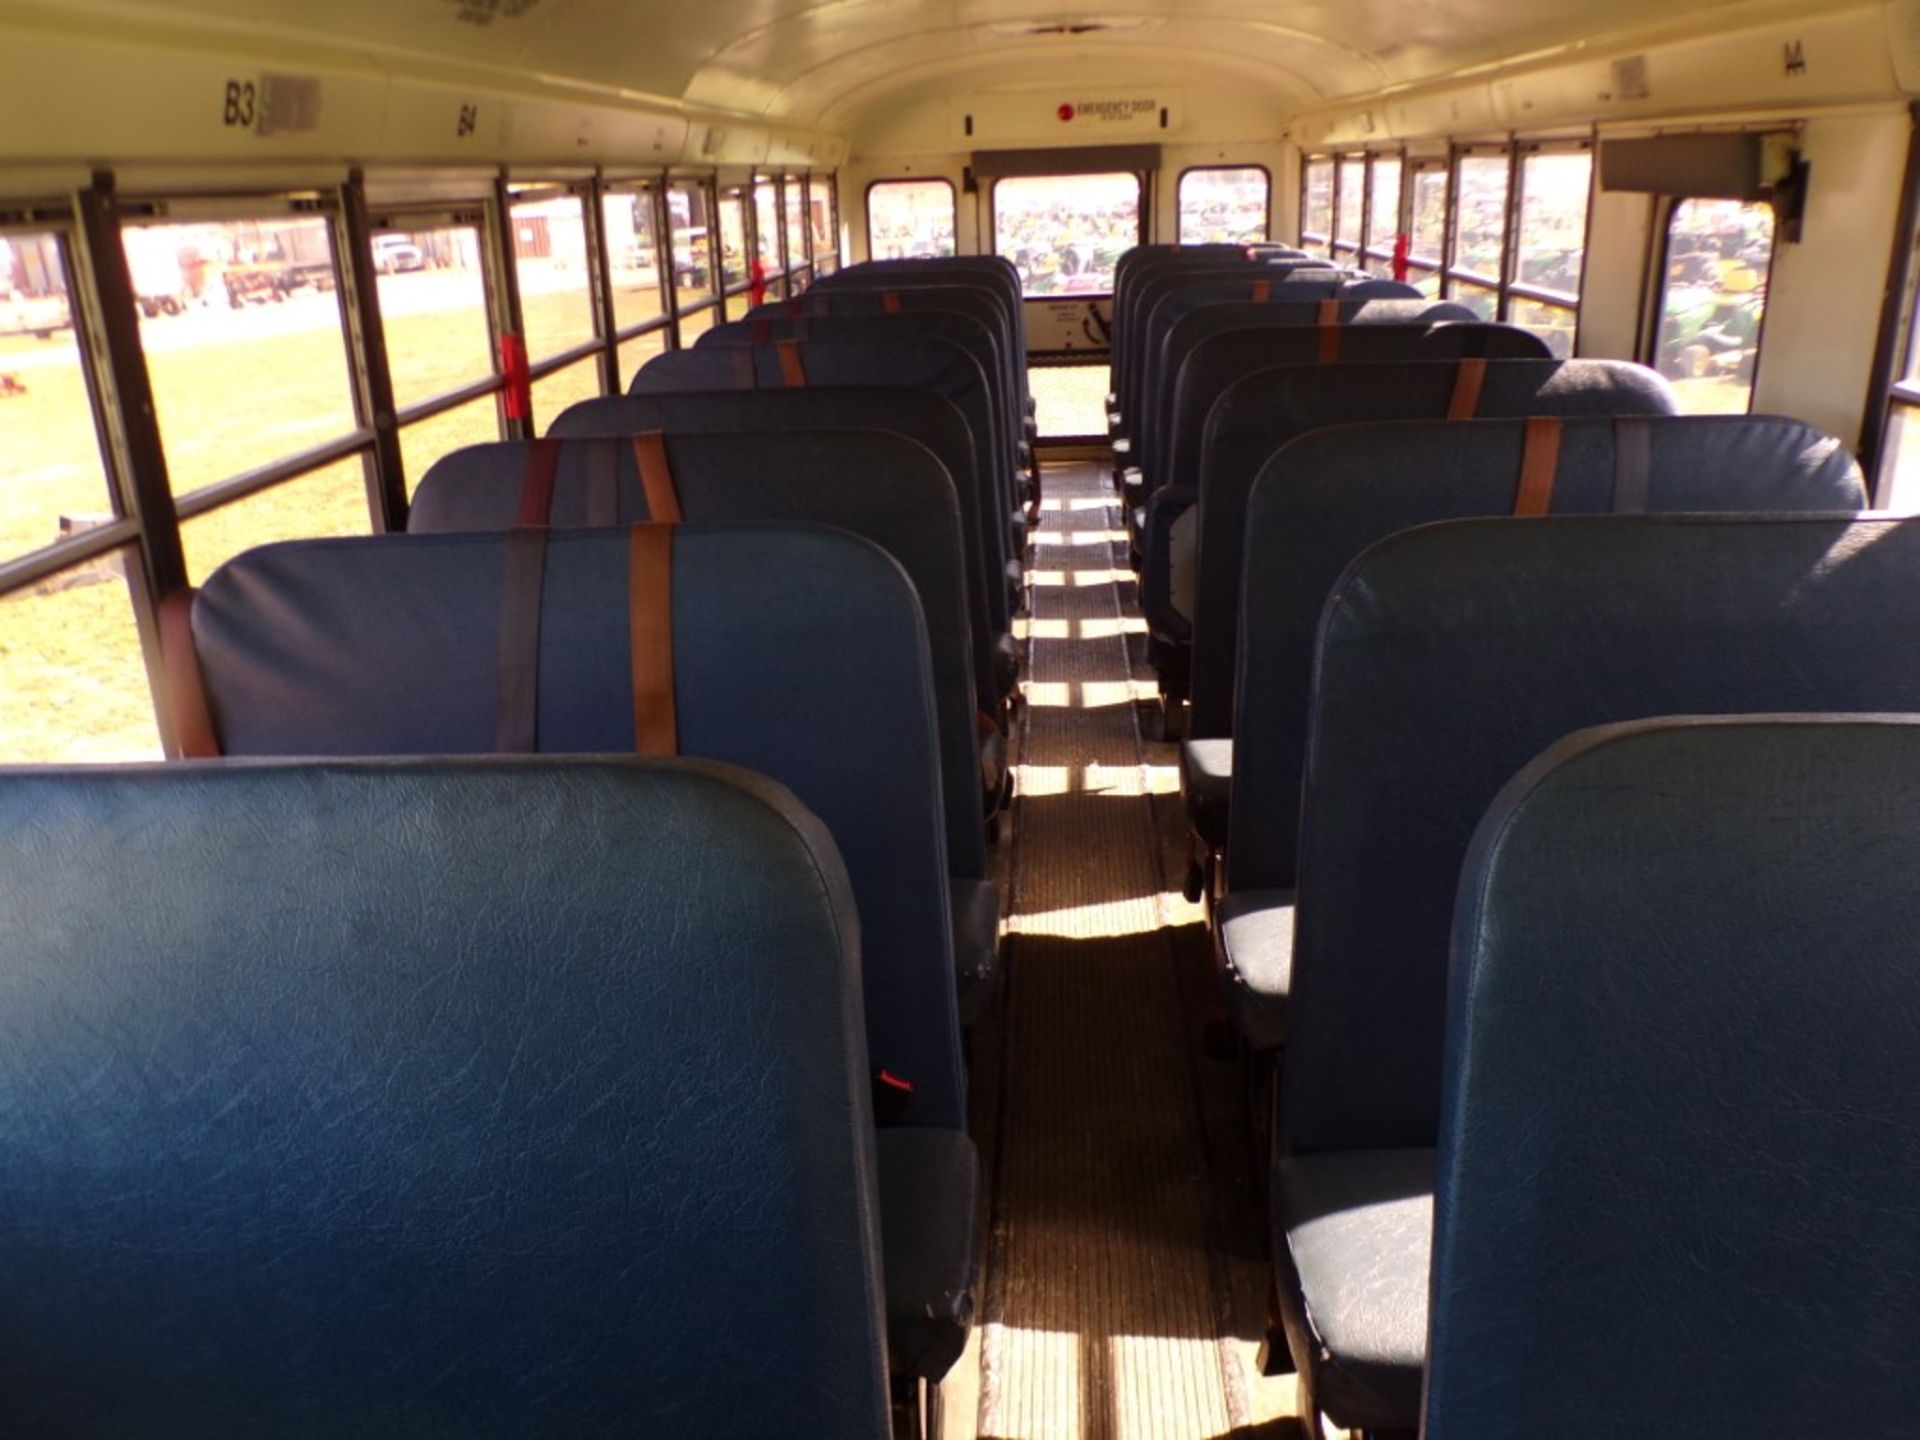 2012 IC Corp. Conventional Nose School Bus, Seat 66C- 44A, MXX Force Auto, 153,364 Miles, Bus #261 - Image 6 of 7